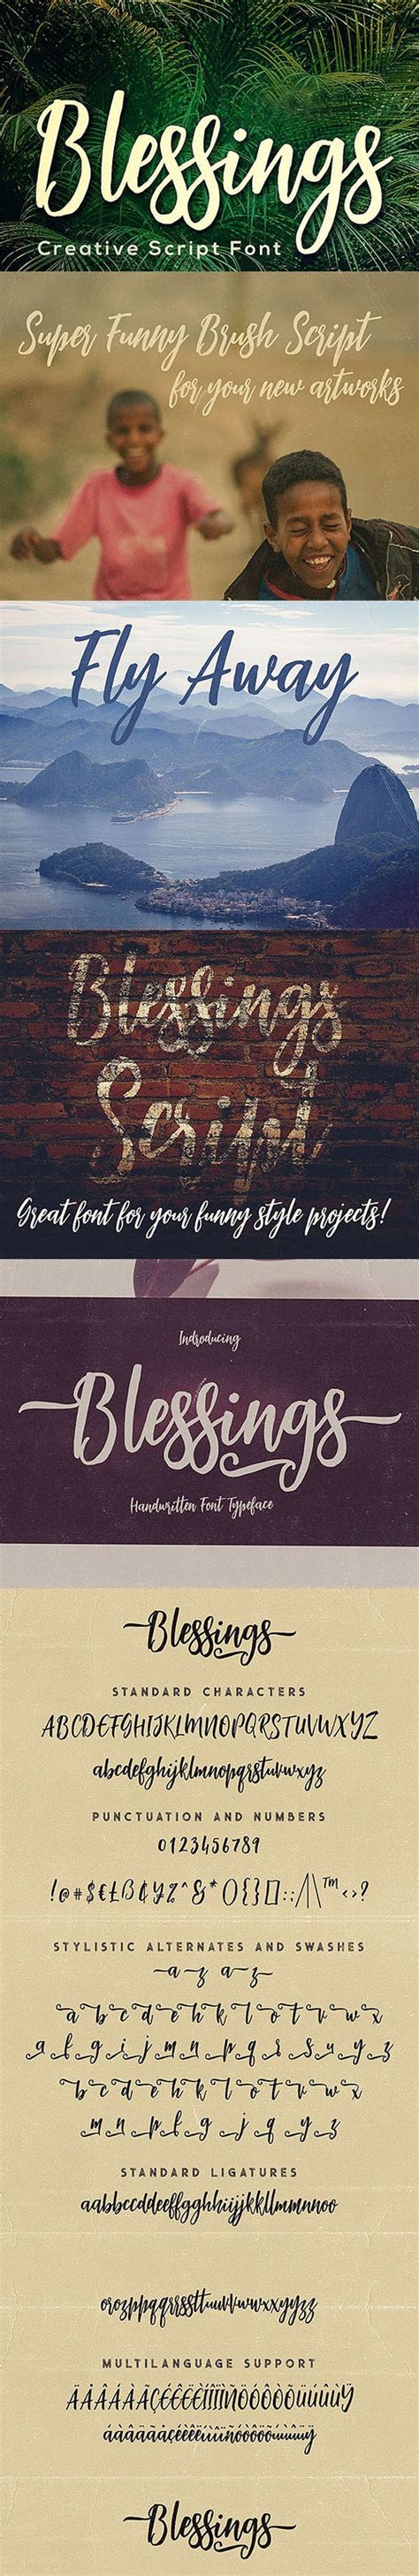 Blessings Script Font By Cruzine2 Graphicriver